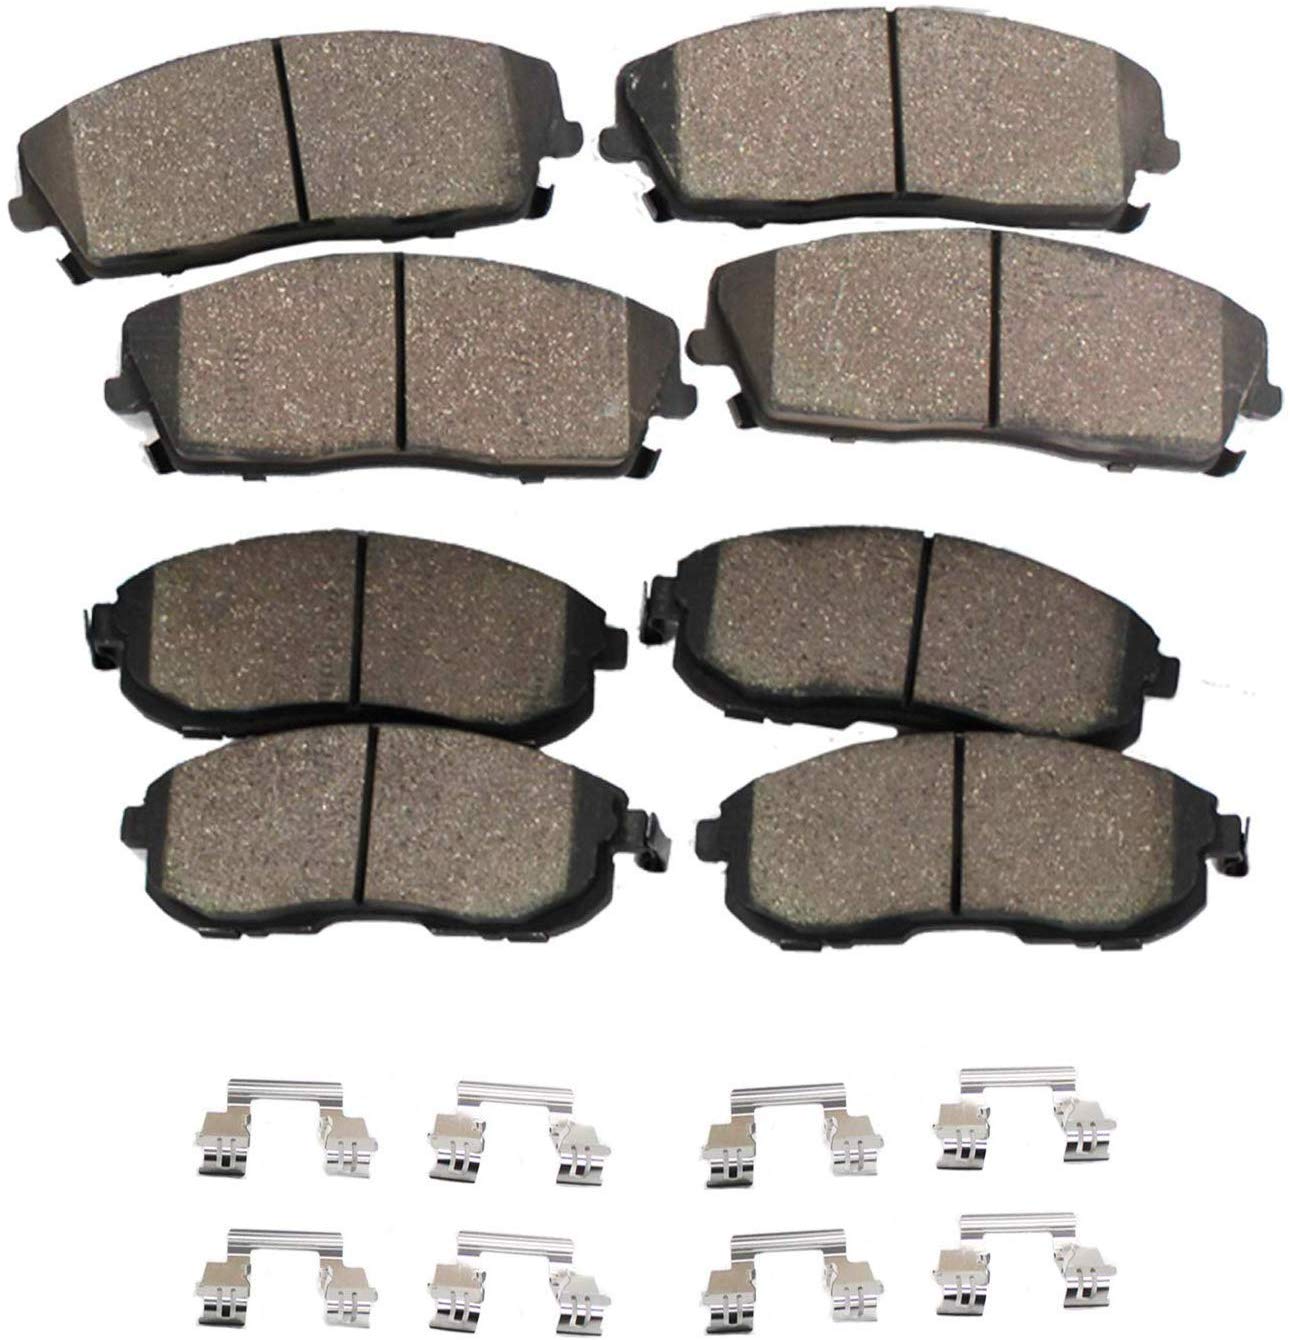 Detroit Axle - All (4) Front and Rear Ceramic Brake Pads w/Hardware for Ford Fusion, Lincoln MKZ, Zephyr, Mazda 6, Mercury Milan - See Fitment